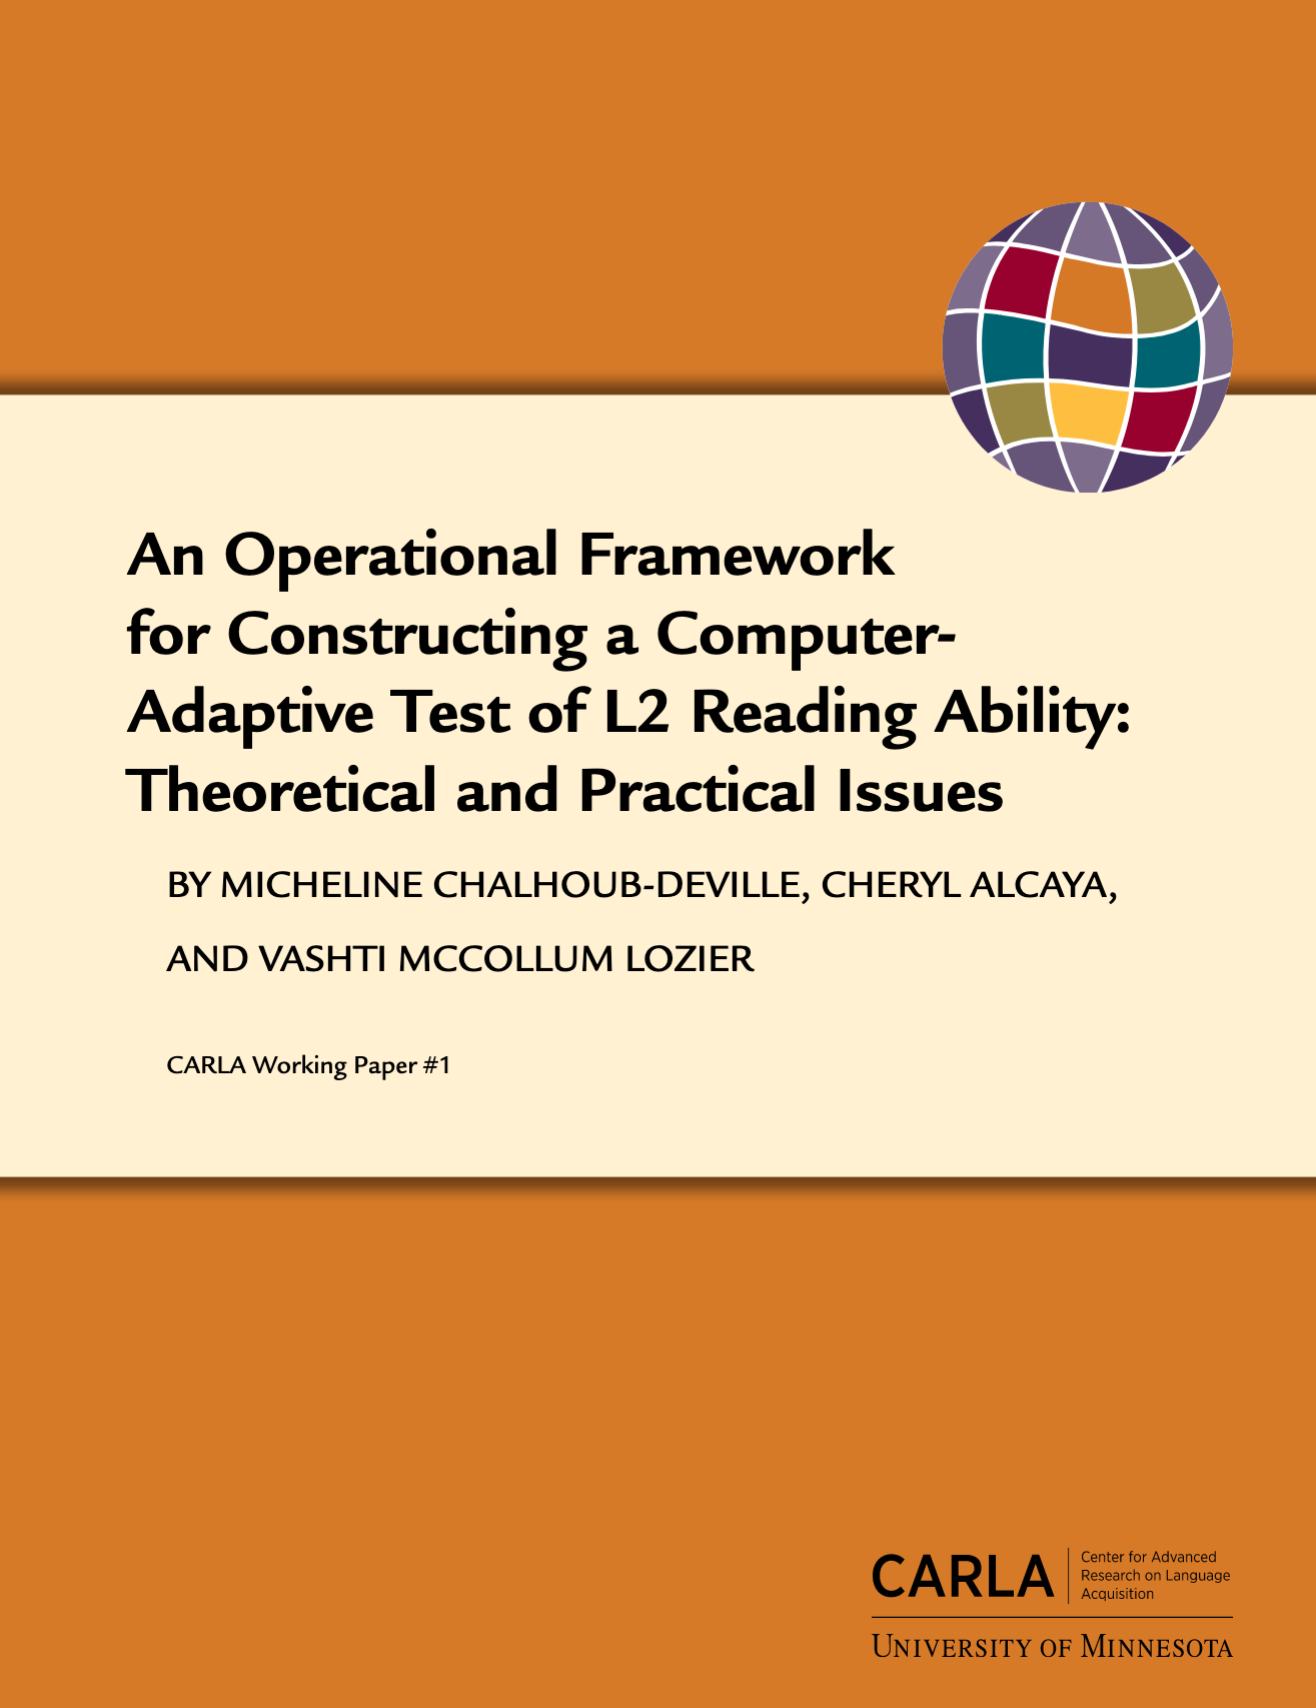 An Operational Framework for Constructing a computer-Adaptive Test of L2 Reading Ability